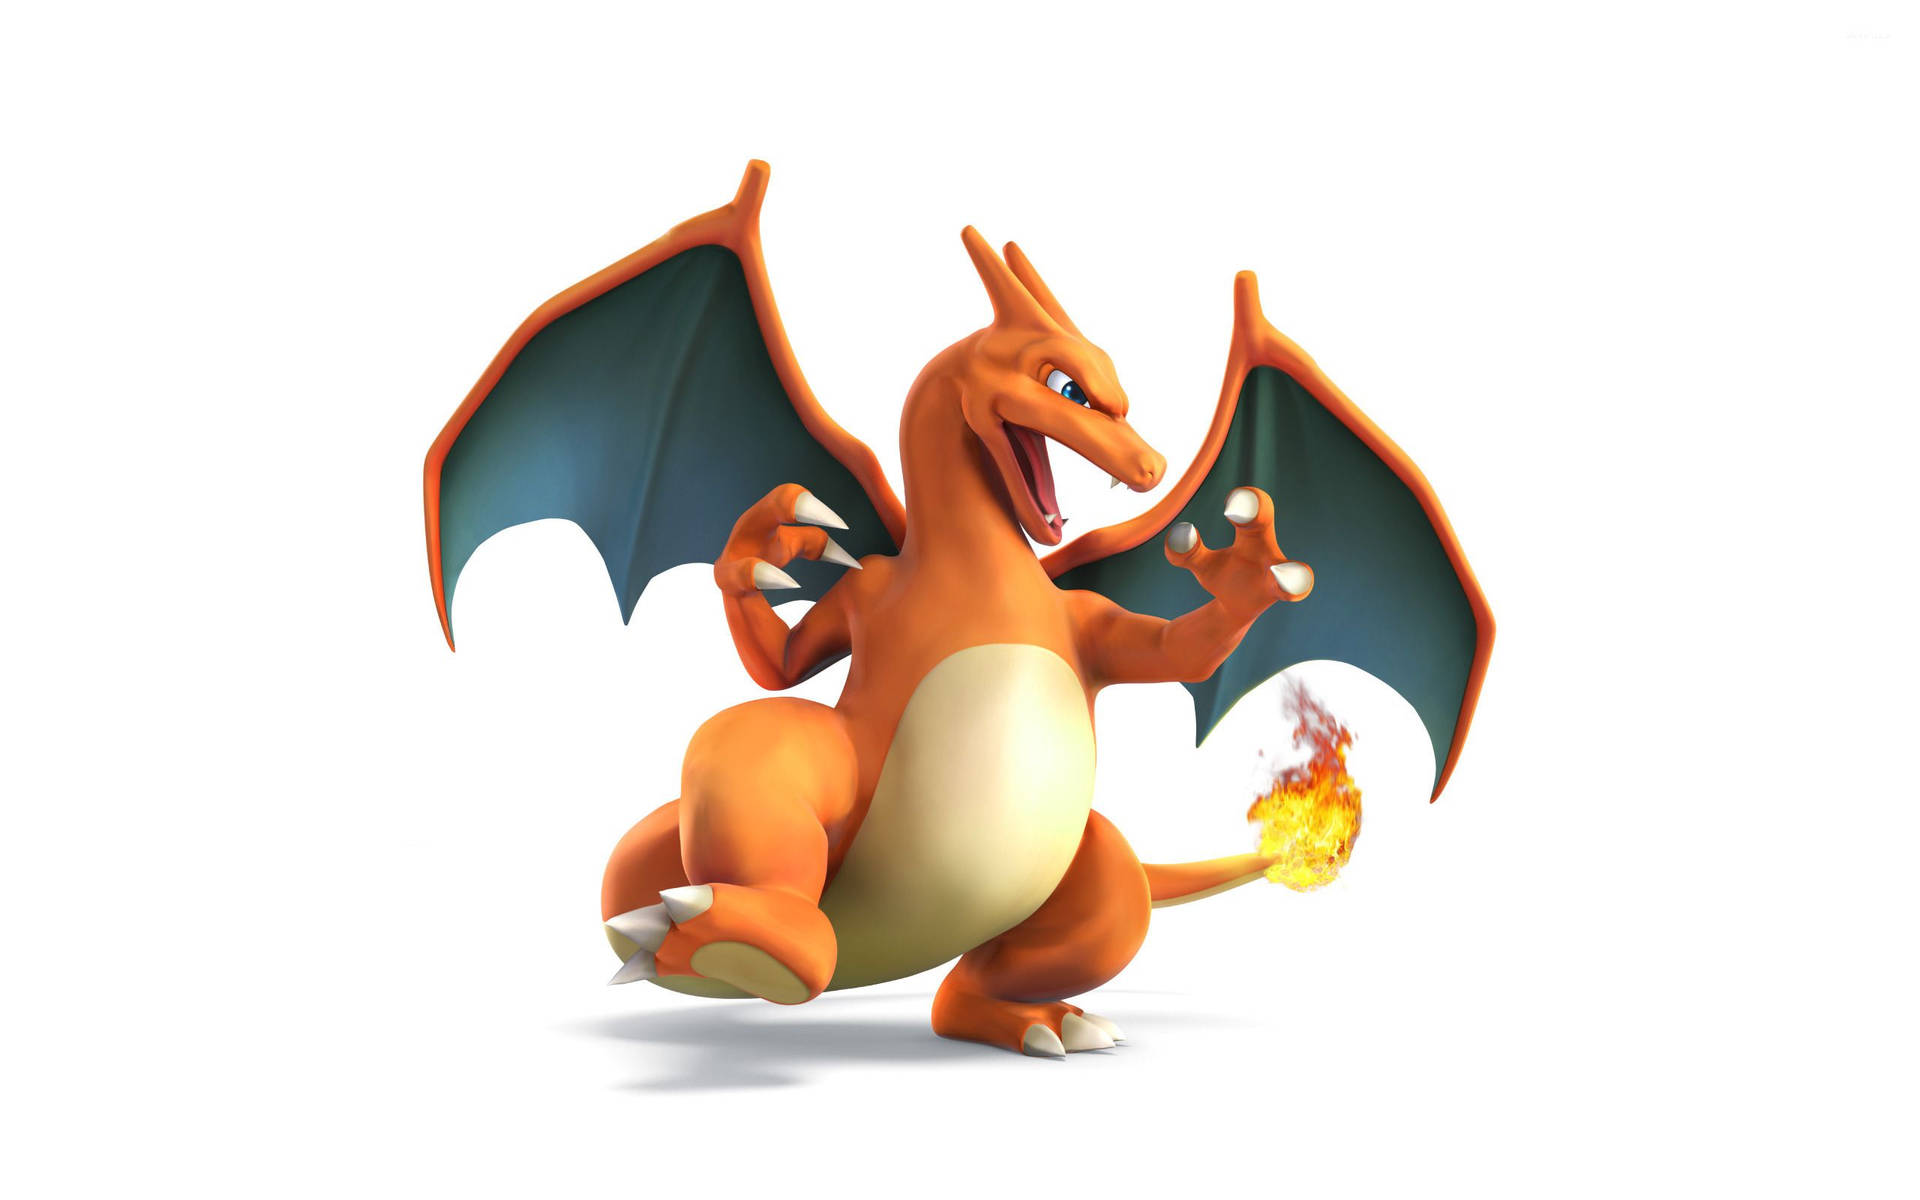 Ash's Charizard using Wing Attack by Pokemonsketchartist on DeviantArt